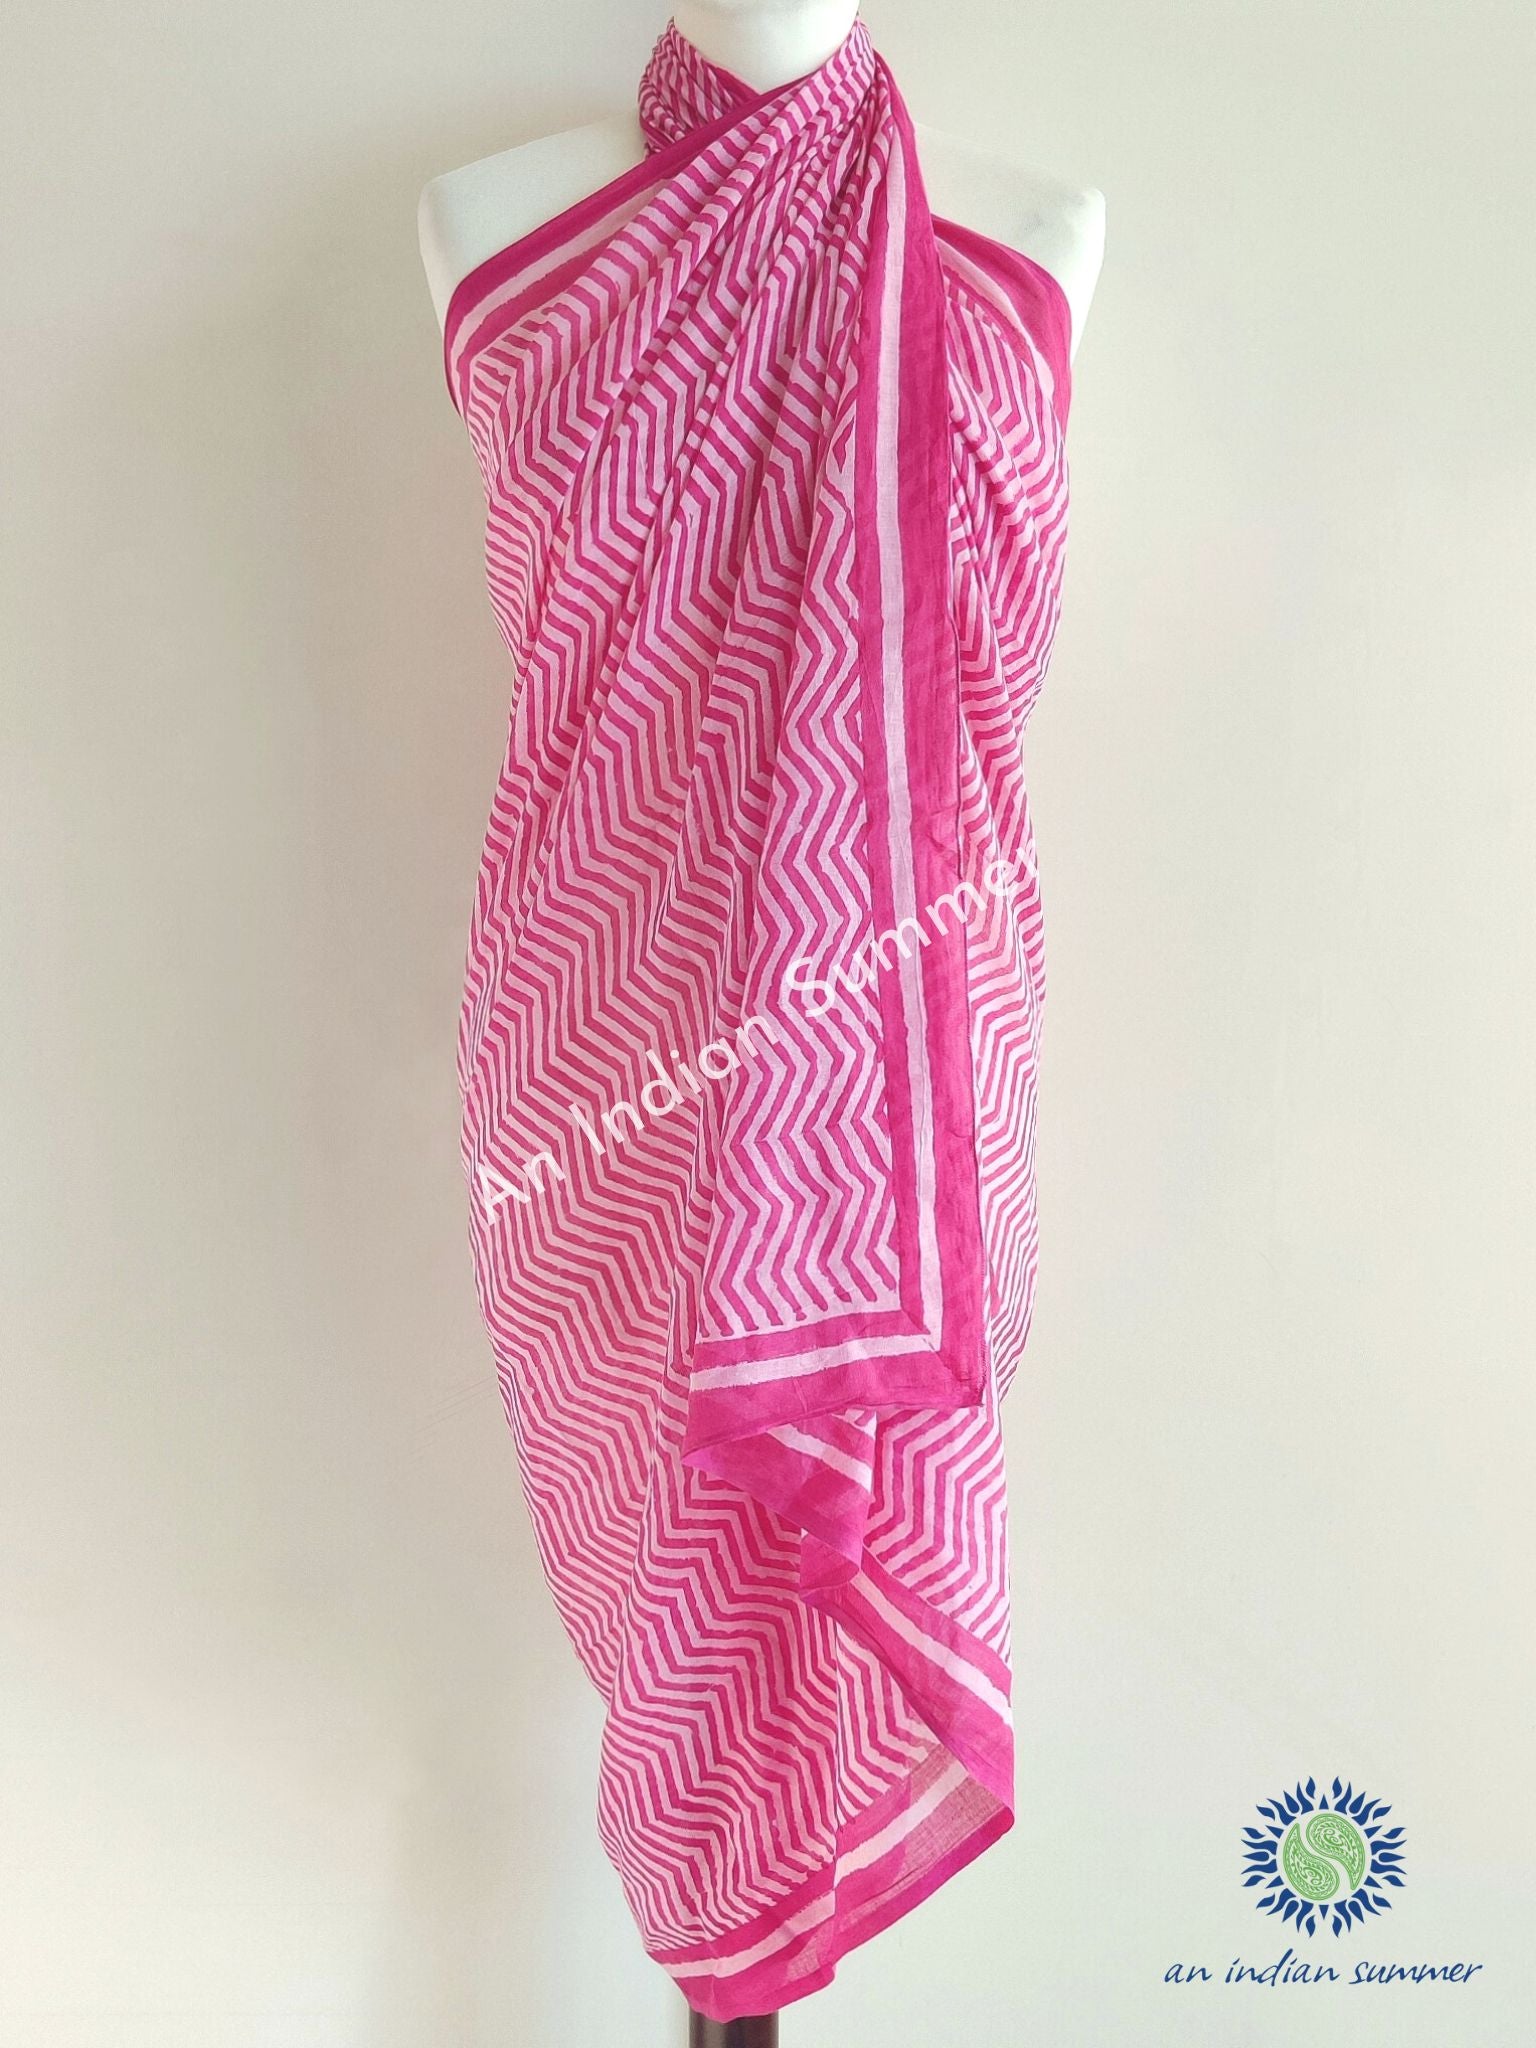 Wavy Zigzag Sarong Pareo | Pink | Hand Block Printed | Soft Cotton Voile | An Indian Summer | Seasonless Timeless Sustainable Ethical Authentic Artisan Conscious Clothing Lifestyle Brand